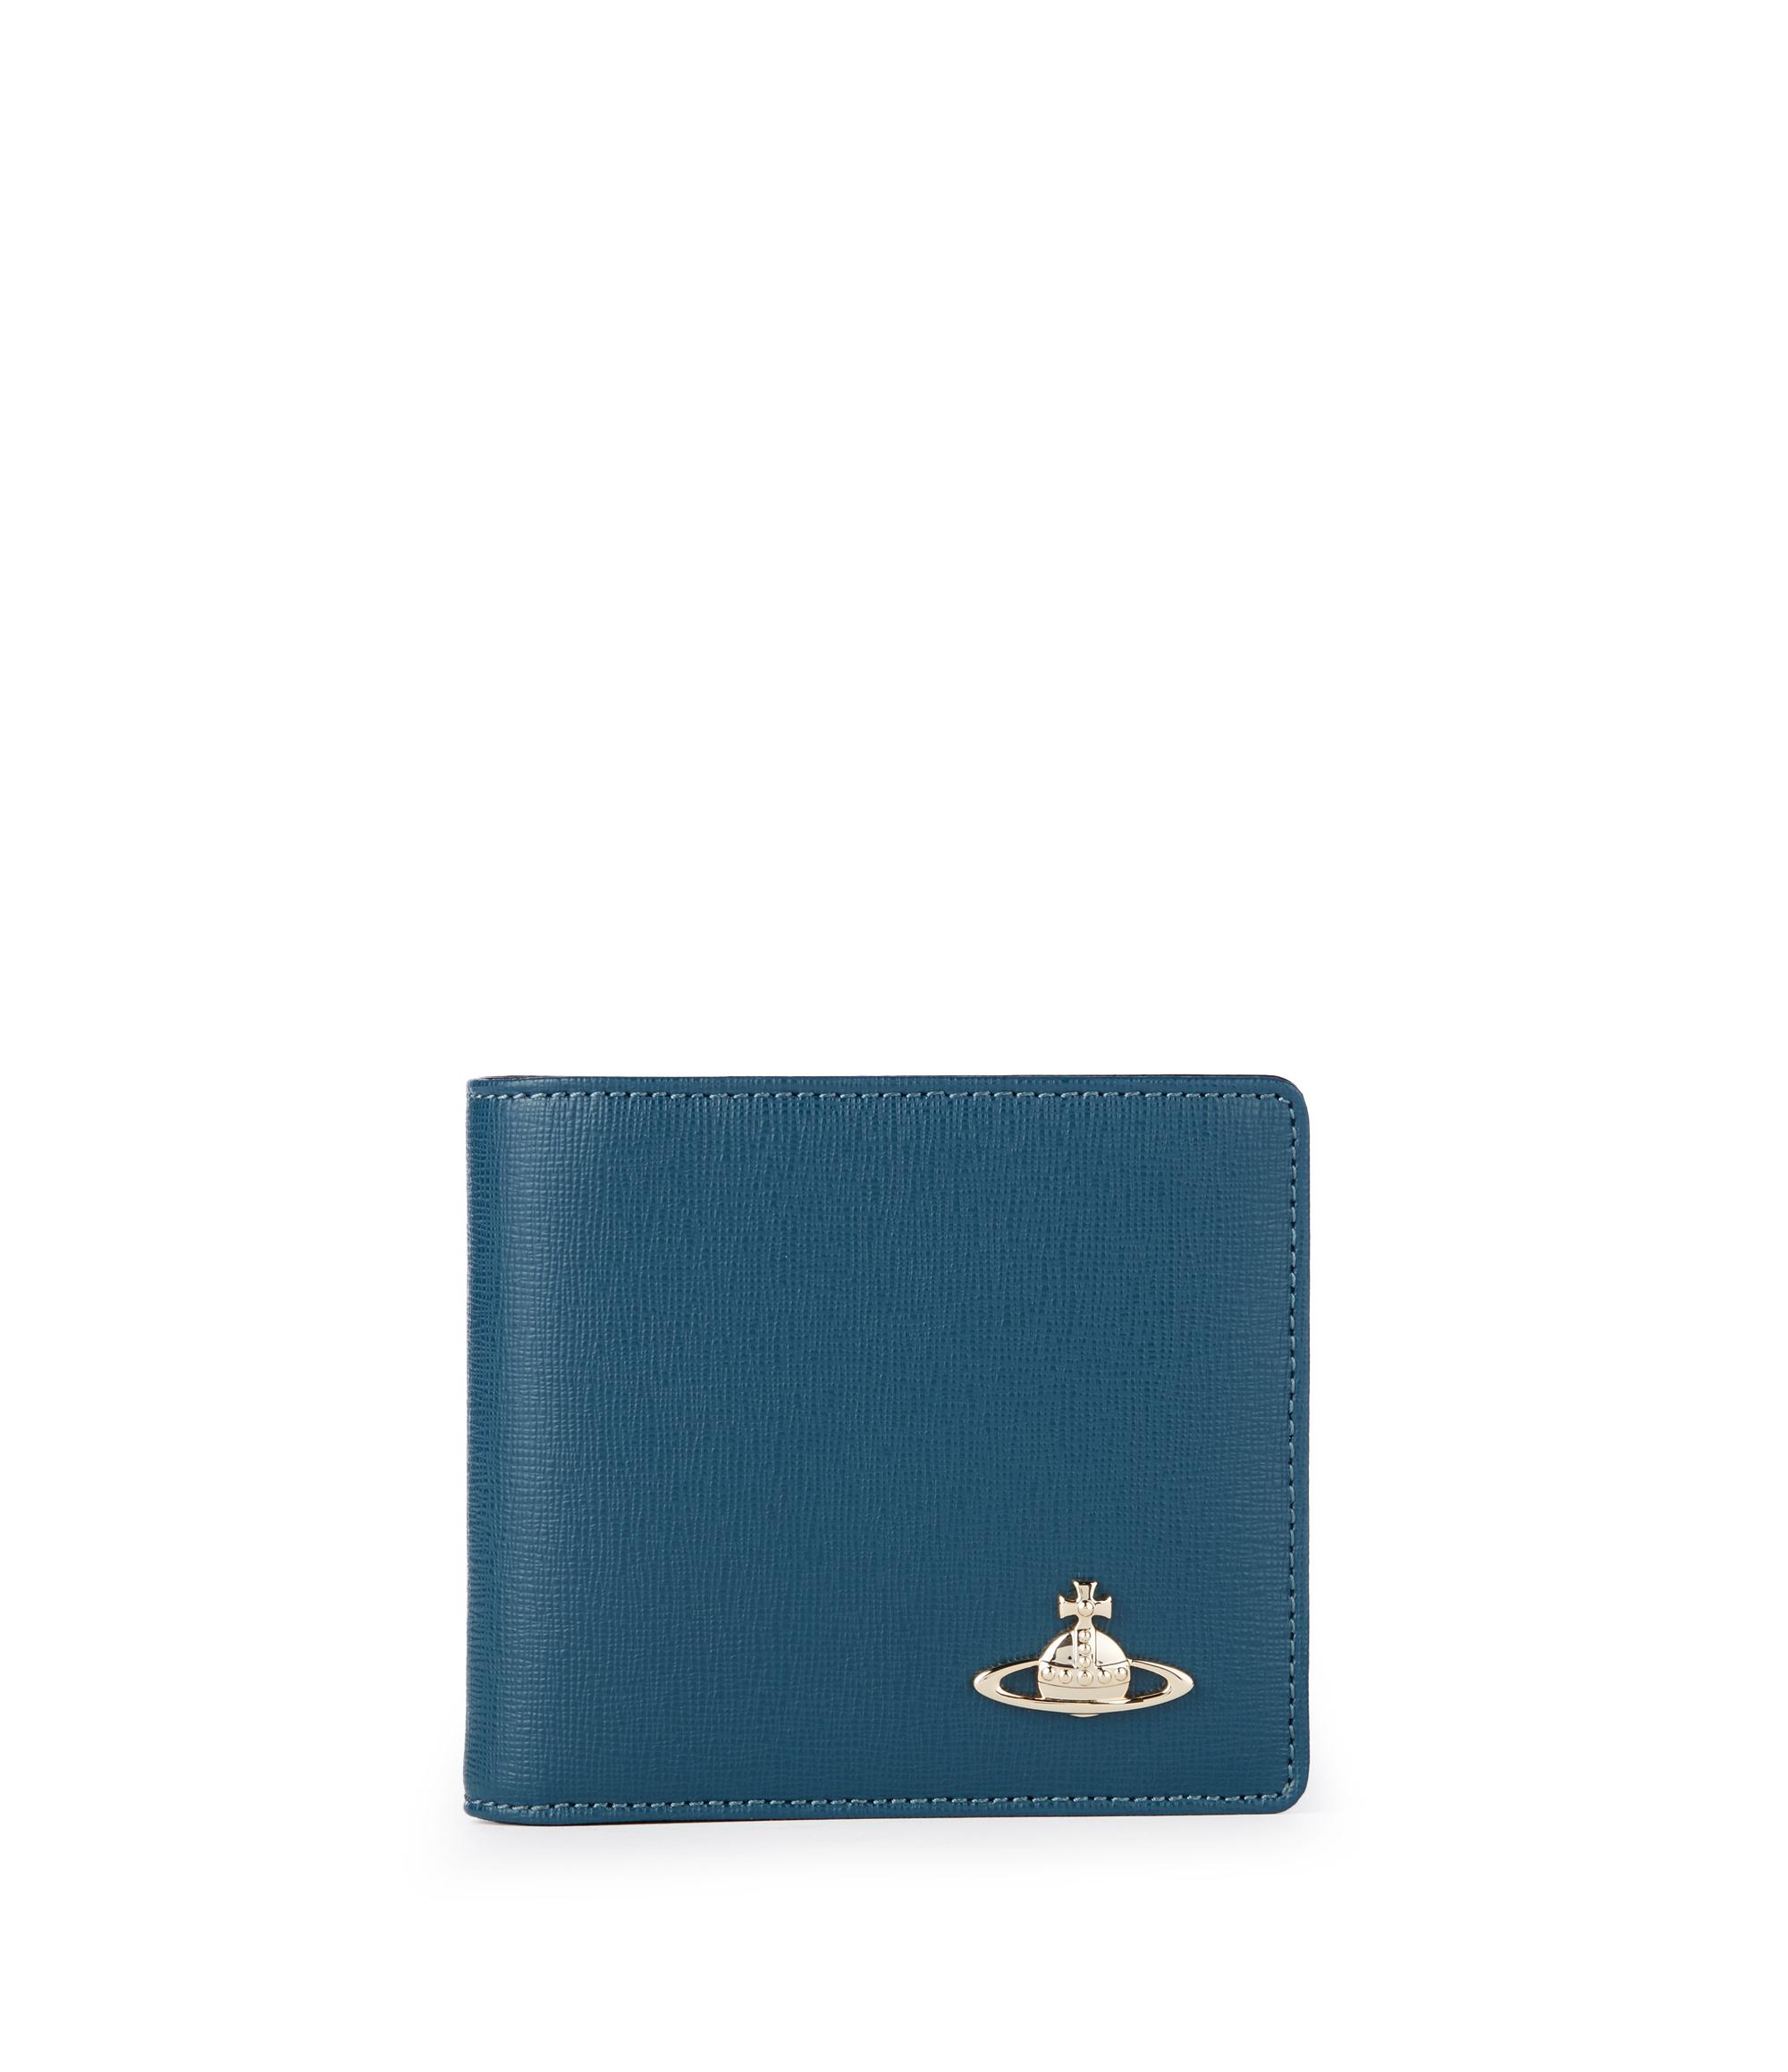 Vivienne Westwood Saffiano Wallet With Coin Pocket 51010009 Blue for